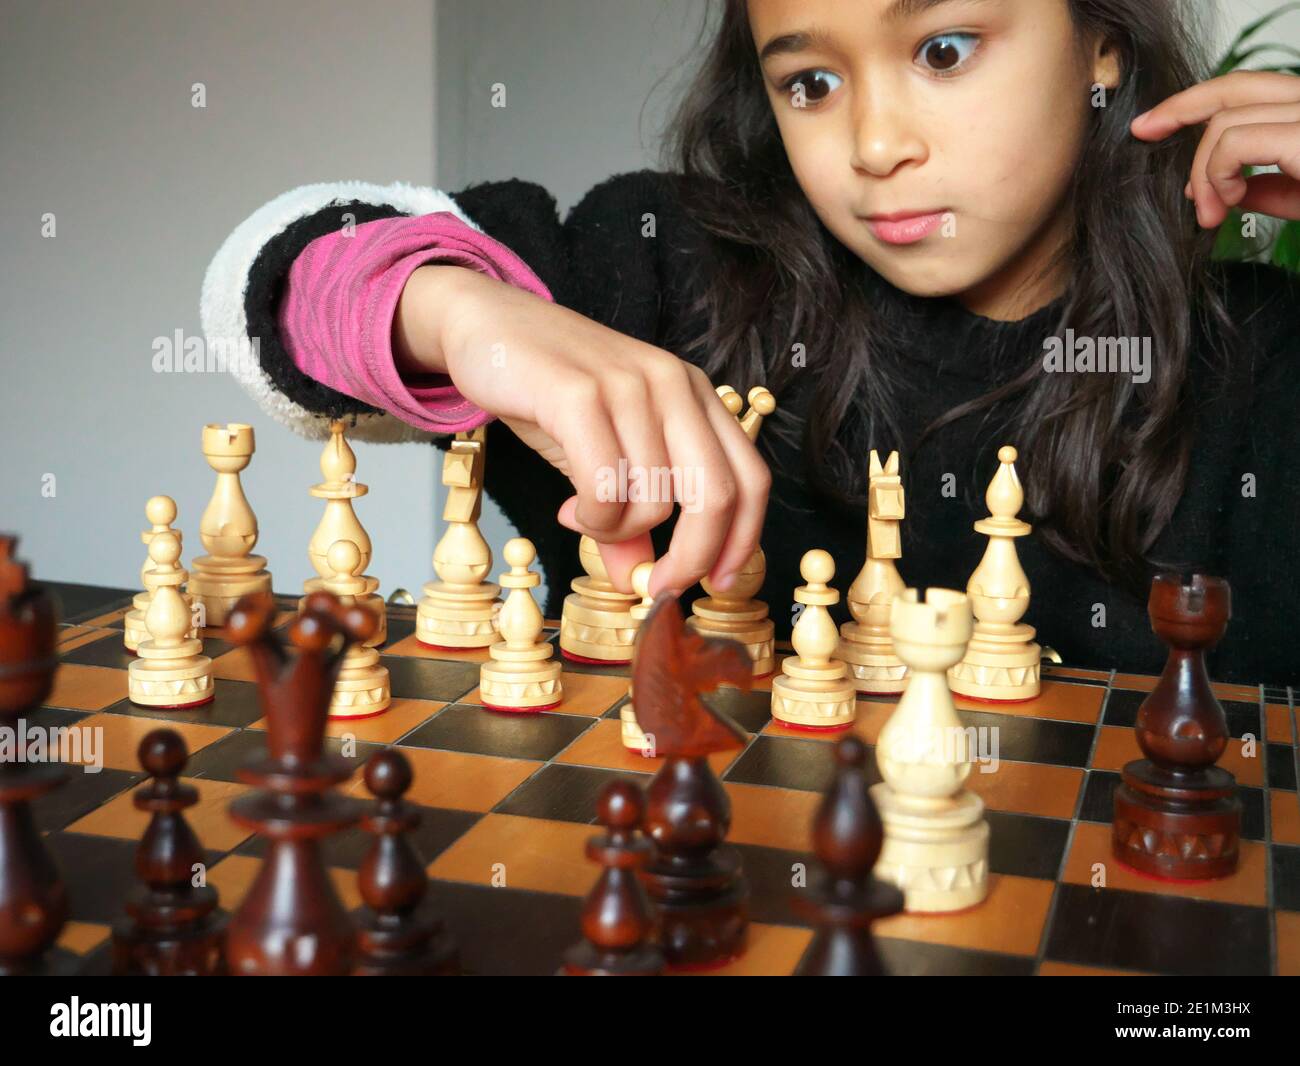 Little girl playing chess with a surprised look on her face. Stock Photo